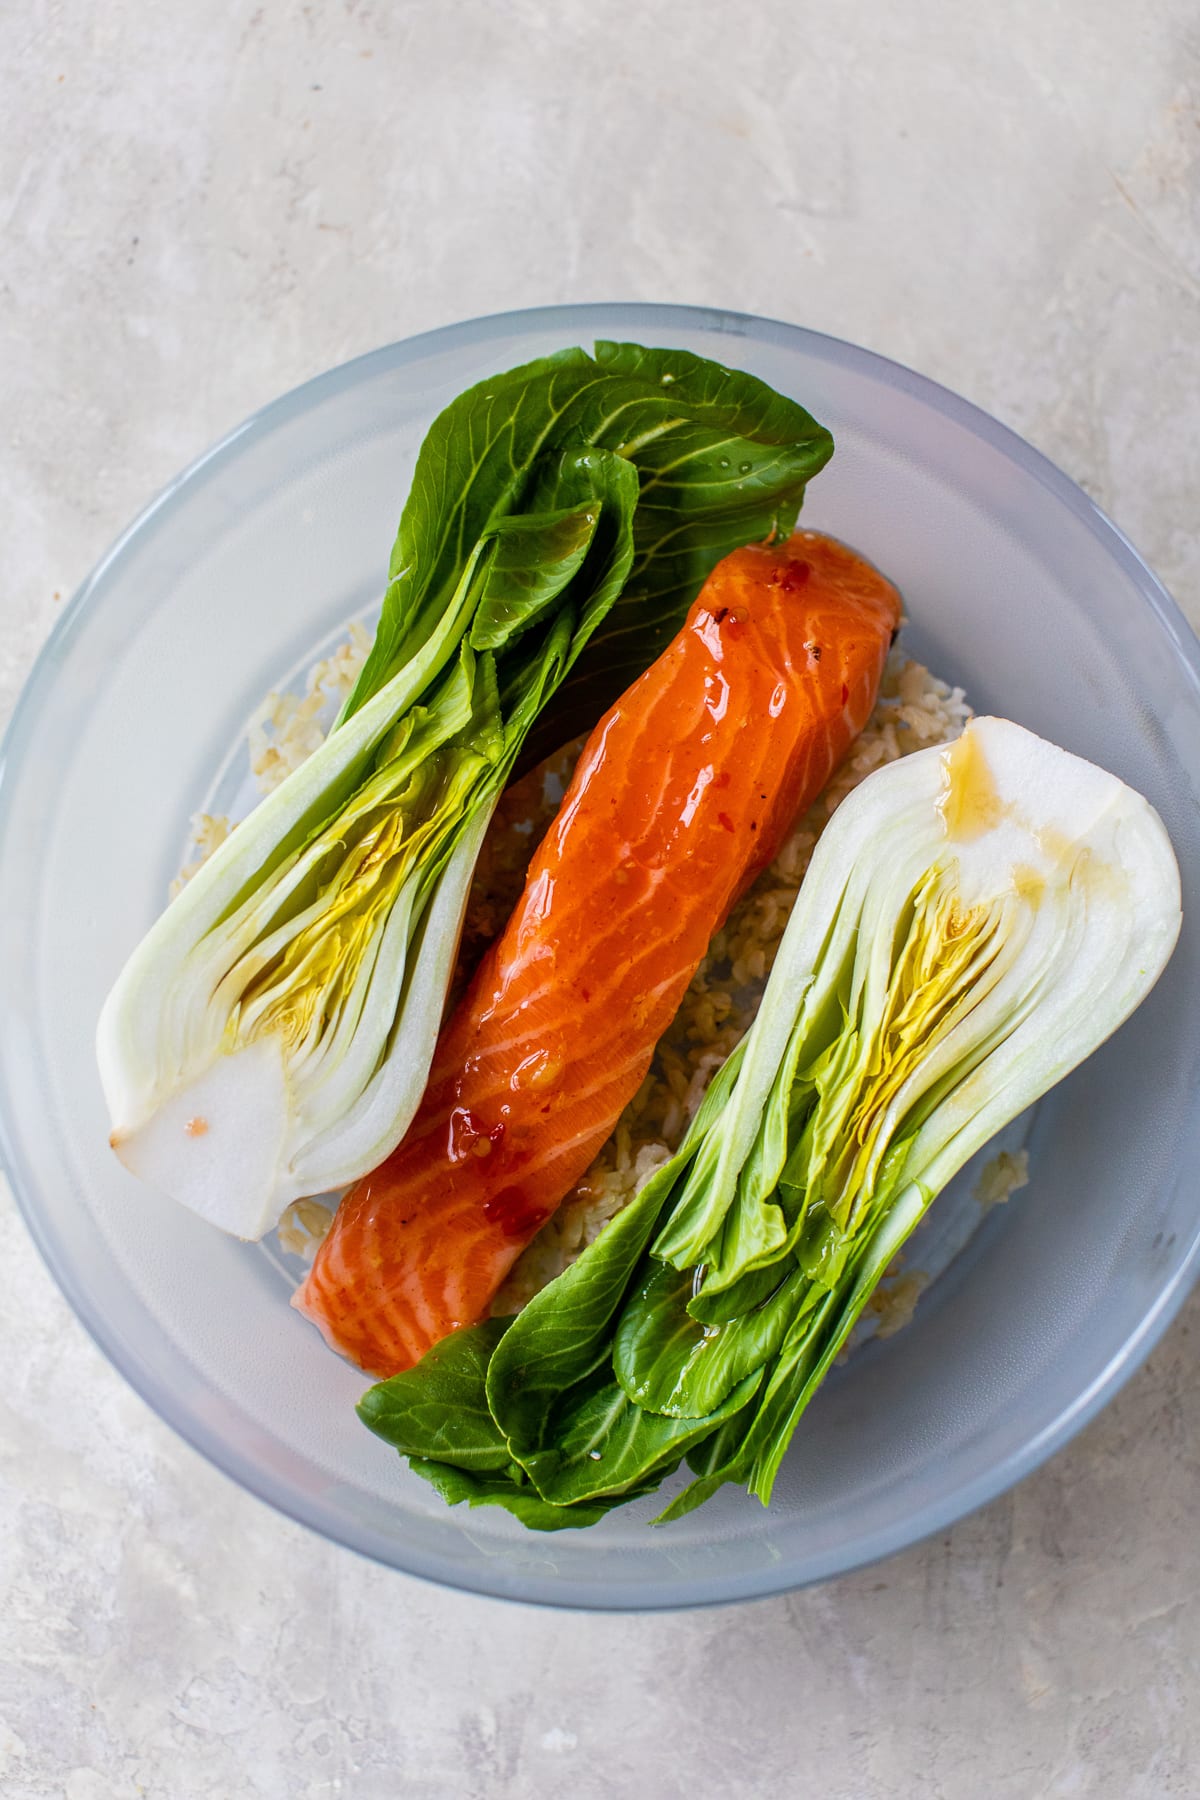 How to heat salmon in the microwave